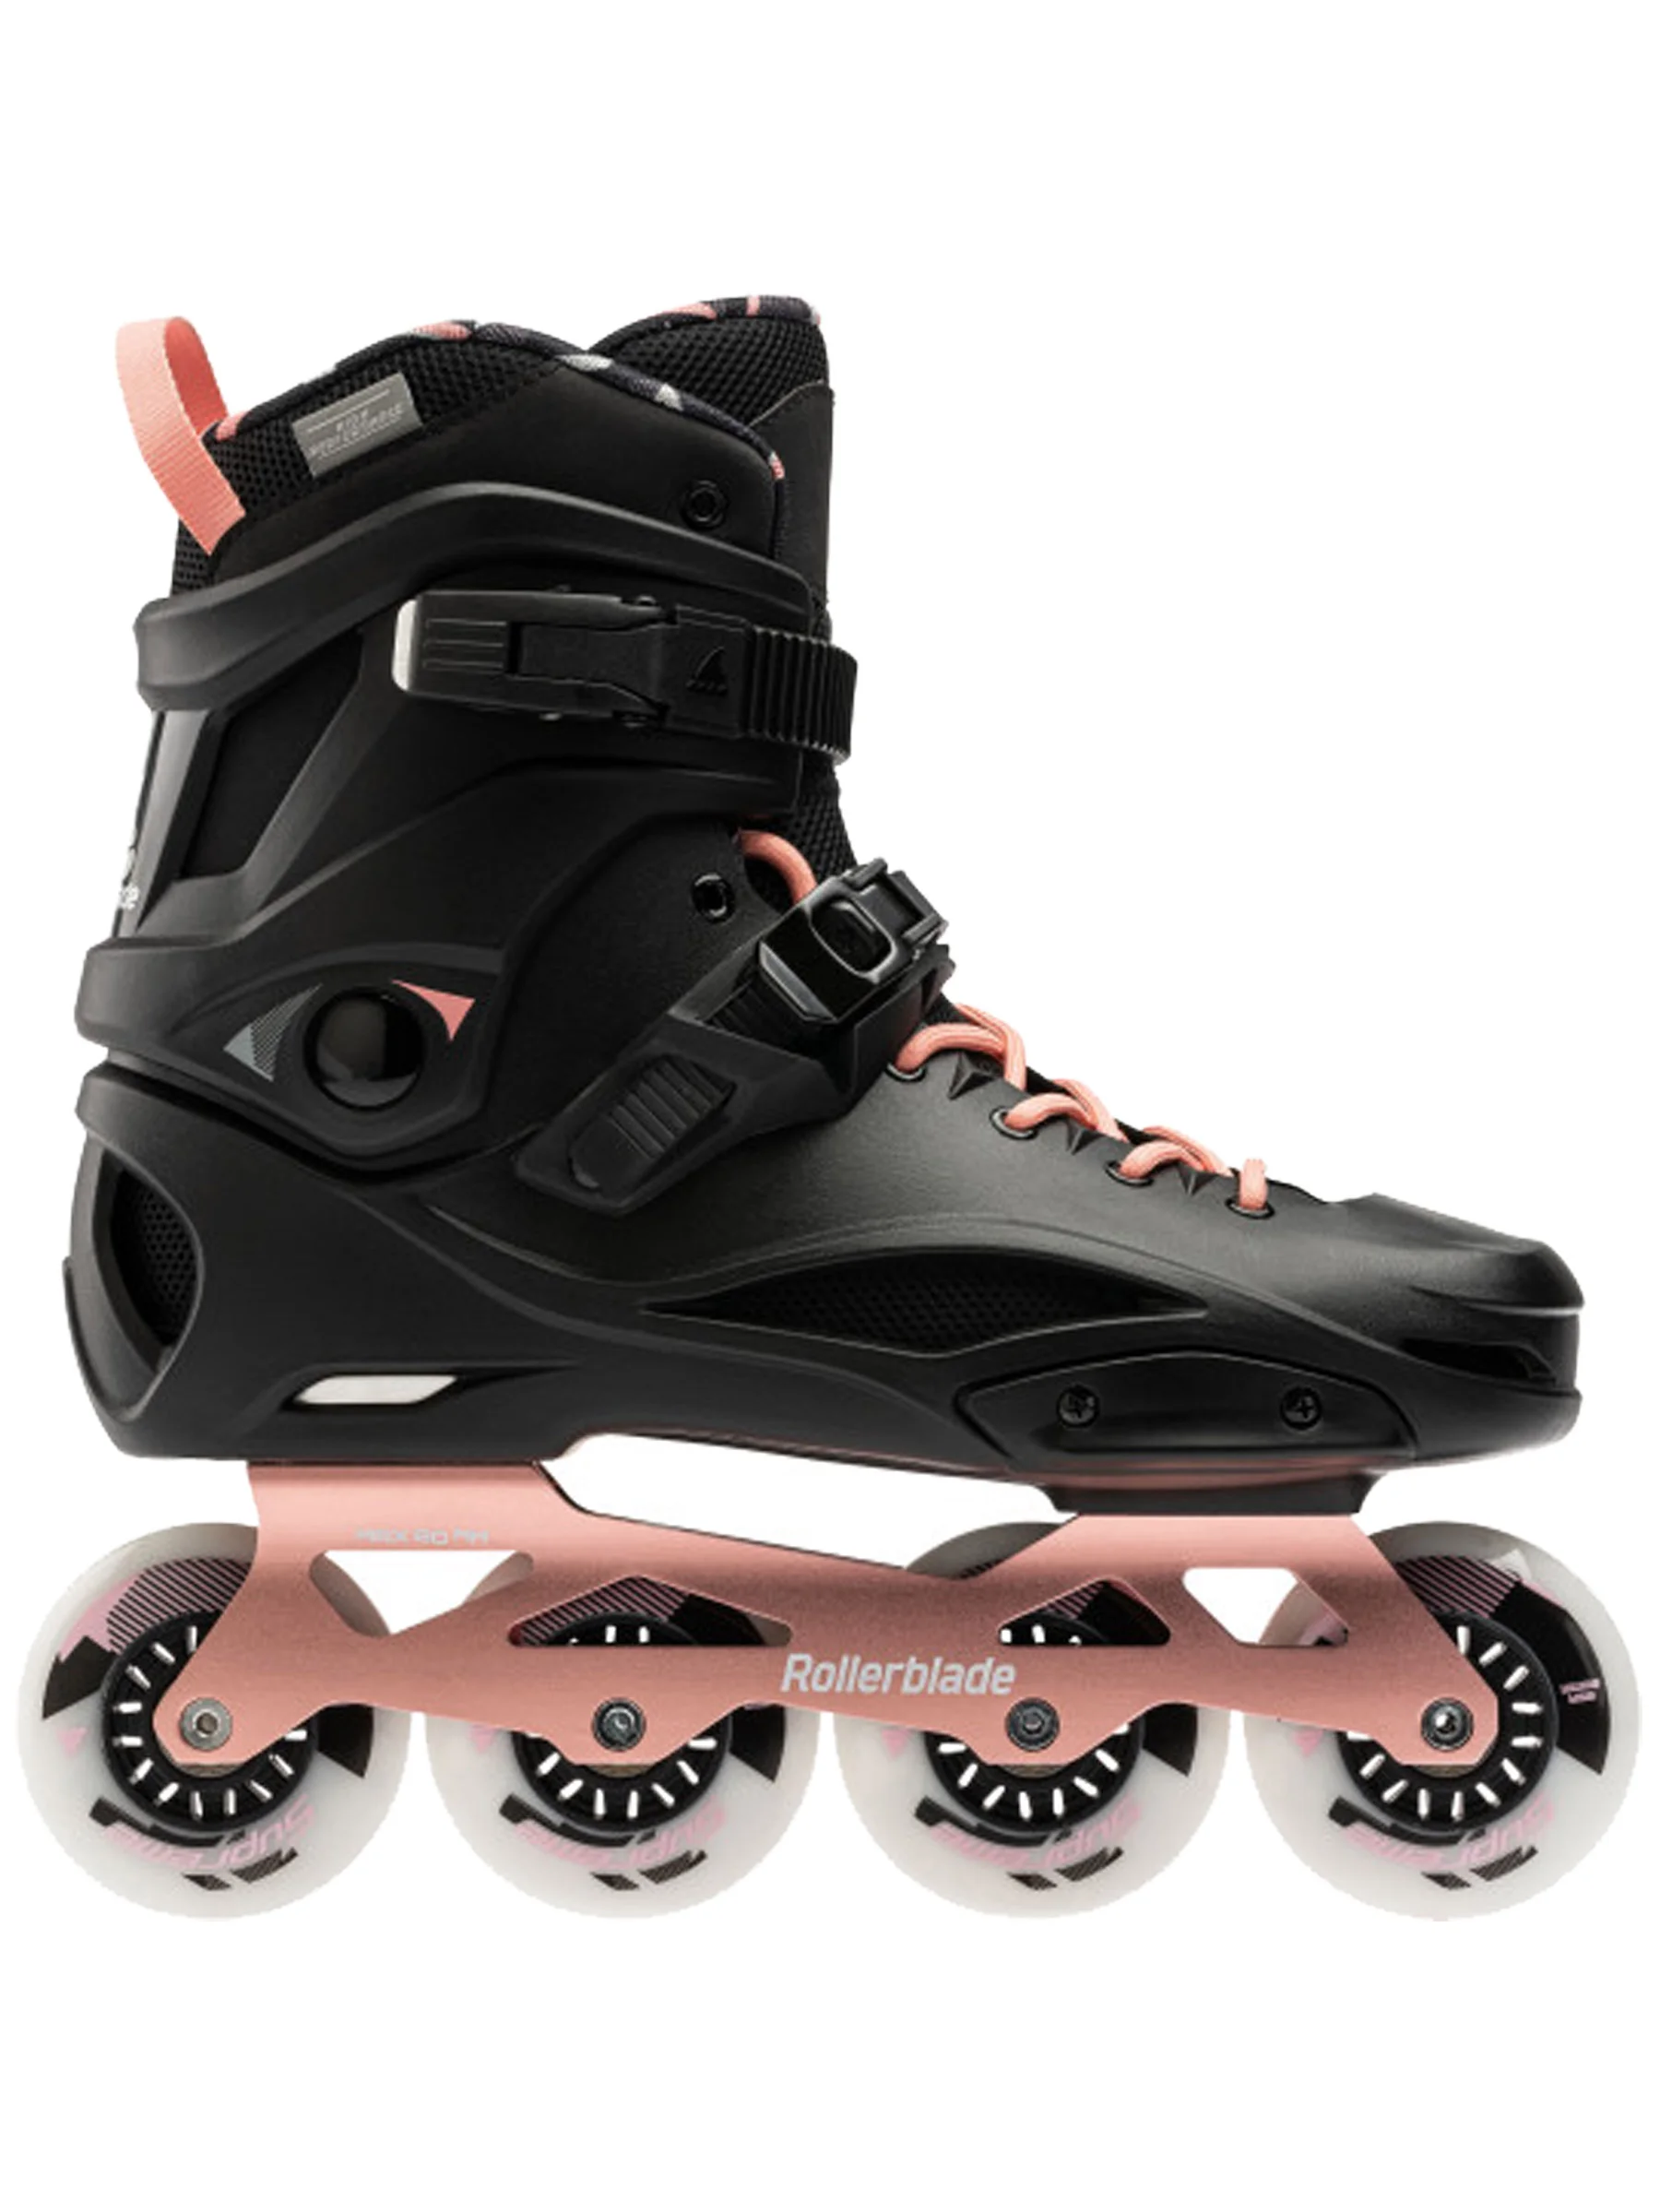 Rollerblade RB80 Pro X pink